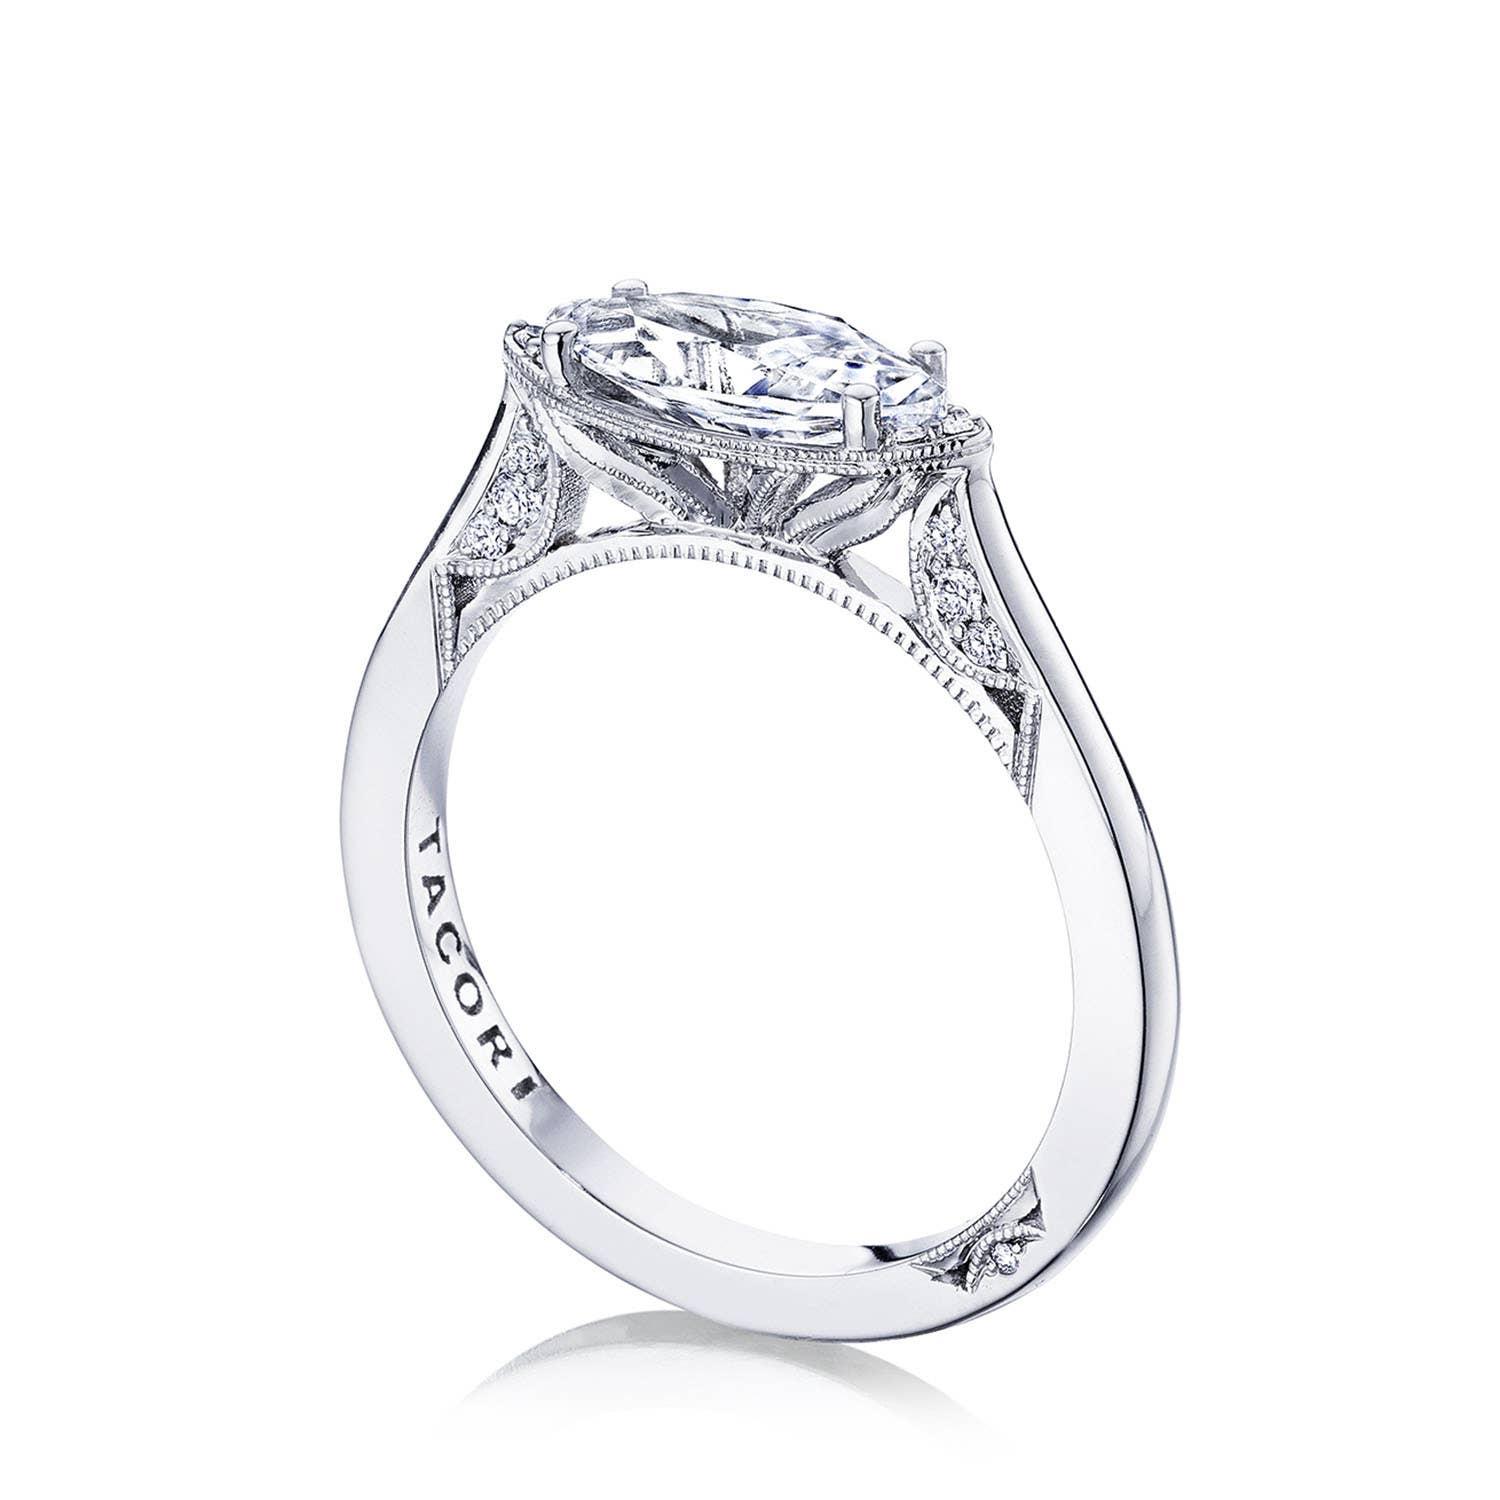 East West setting from Tacori